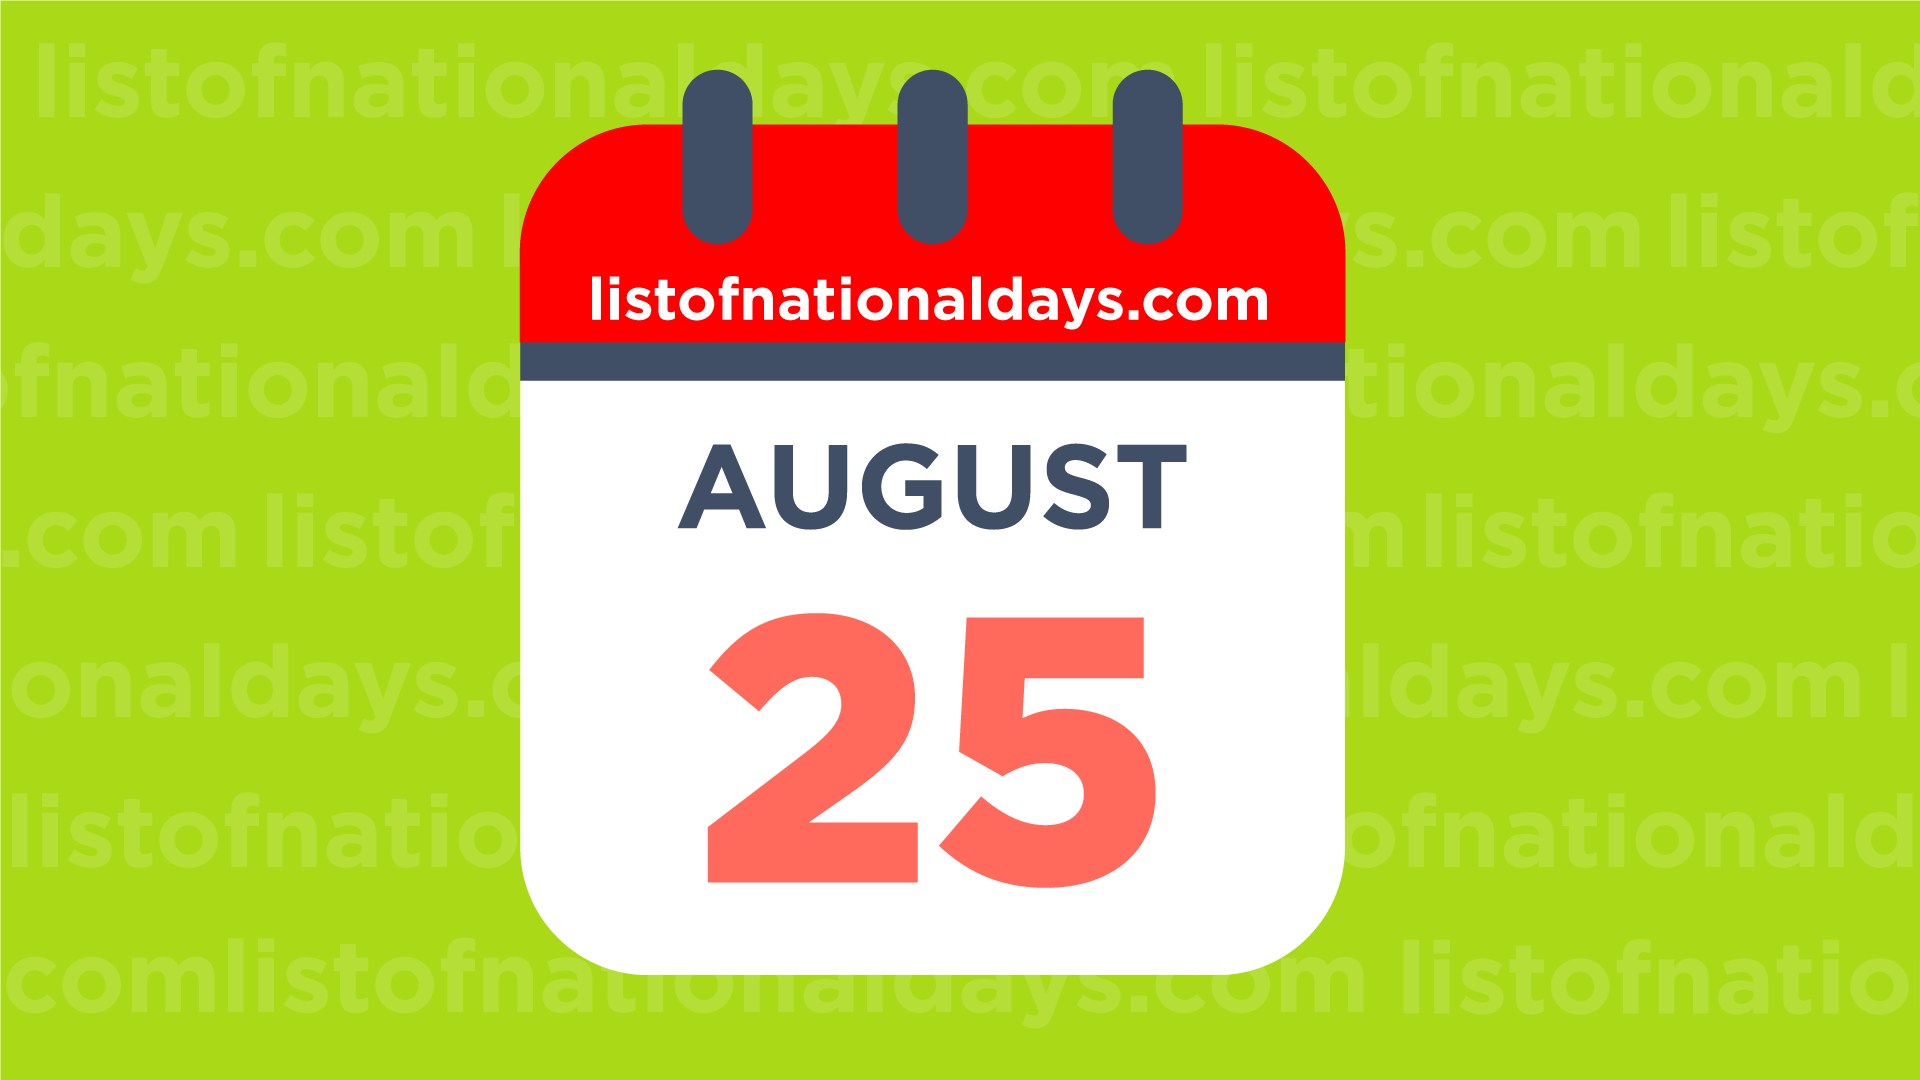 August 25th National Holidays,Observances and Famous Birthdays